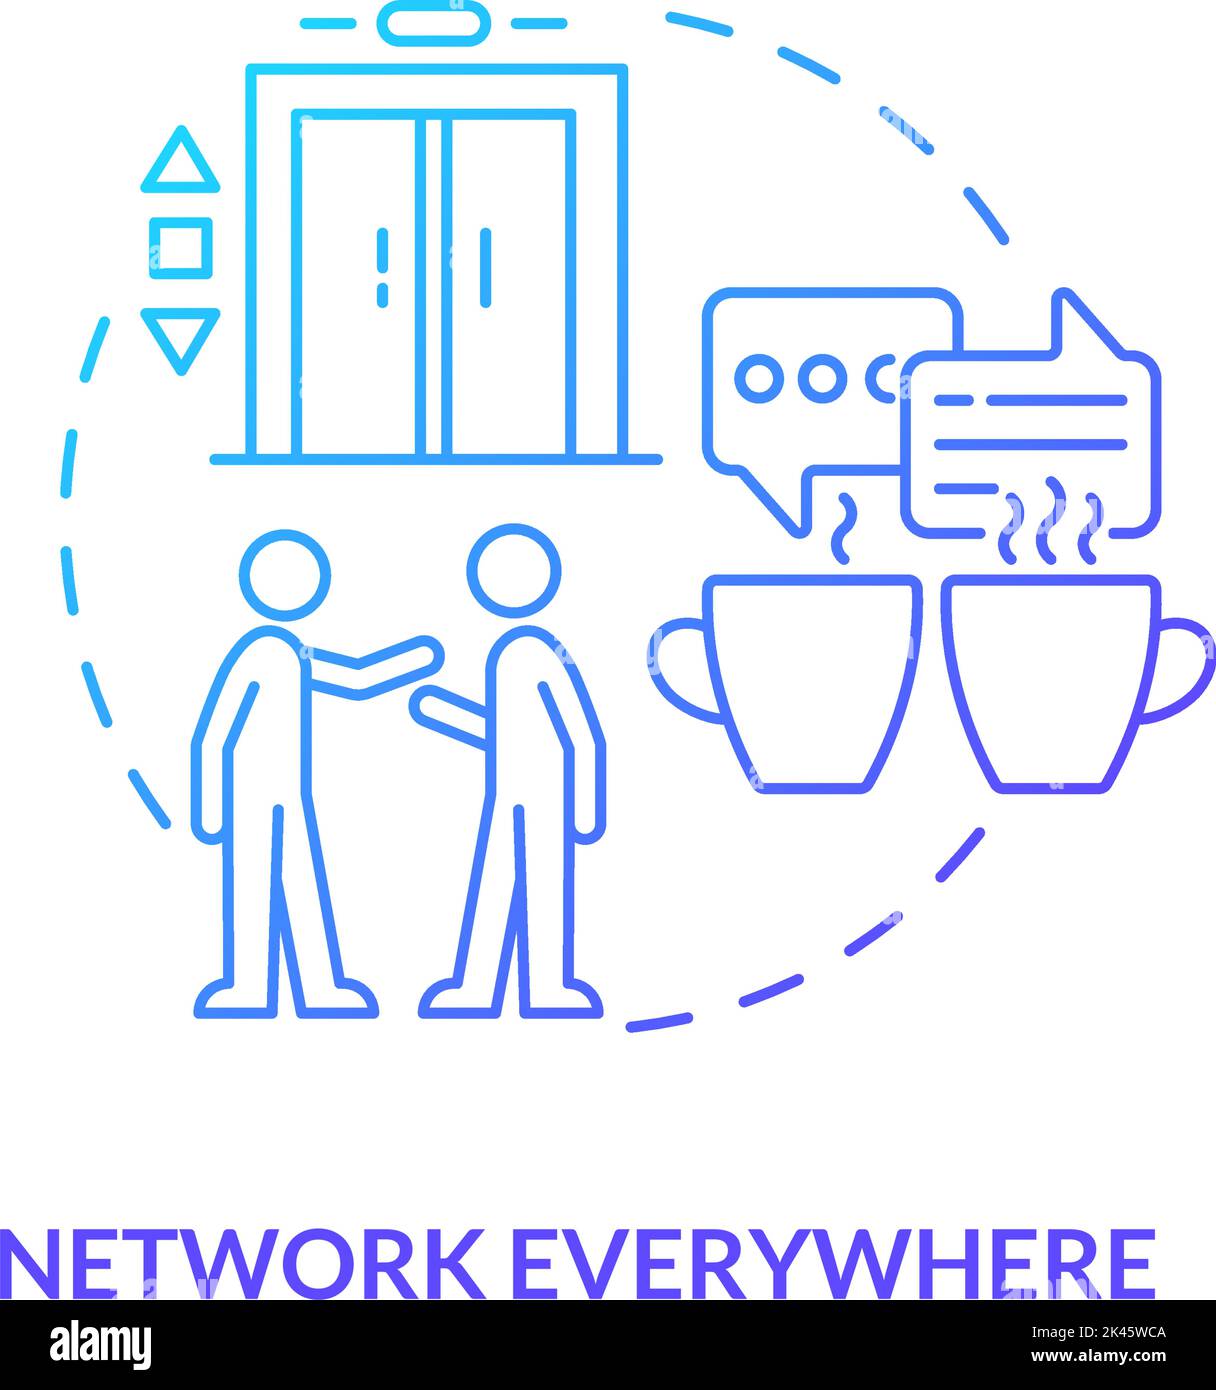 Network everywhere blue gradient concept icon Stock Vector